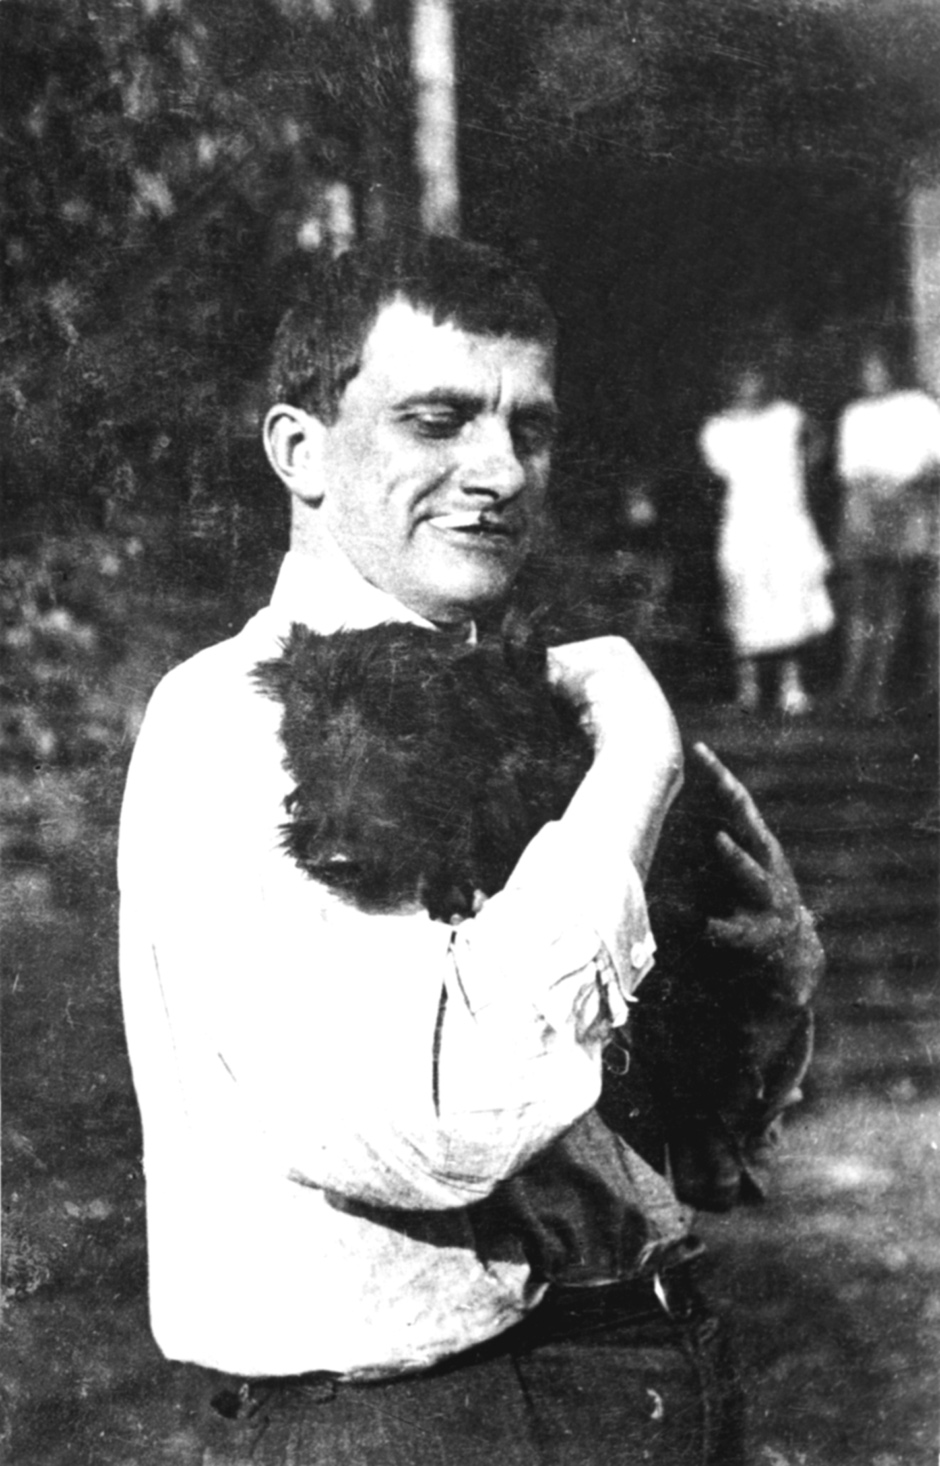 Vladimir Mayakovsky with Scotty, a dog bought by Lili Brik in England, at the Briks’ dacha in Pushkino, summer 1924